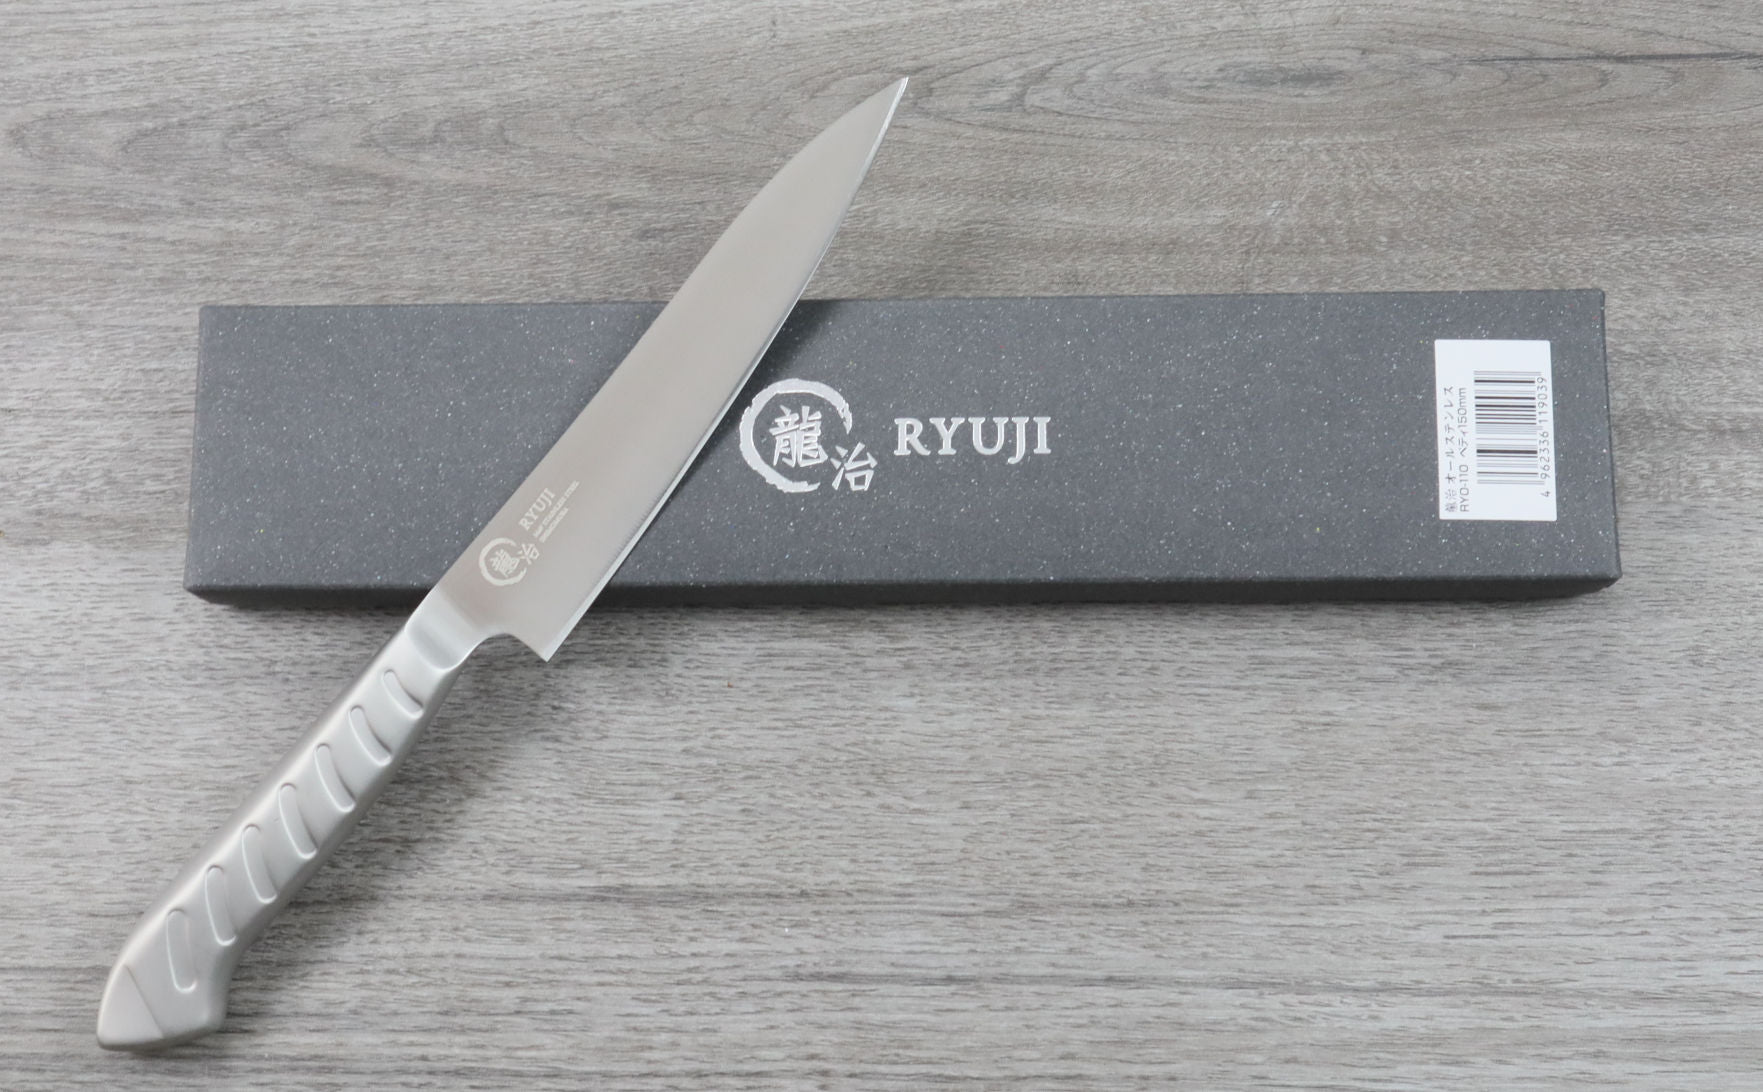 Ryuji All Stainless-Steel Petty (Utility) Knife 150mm